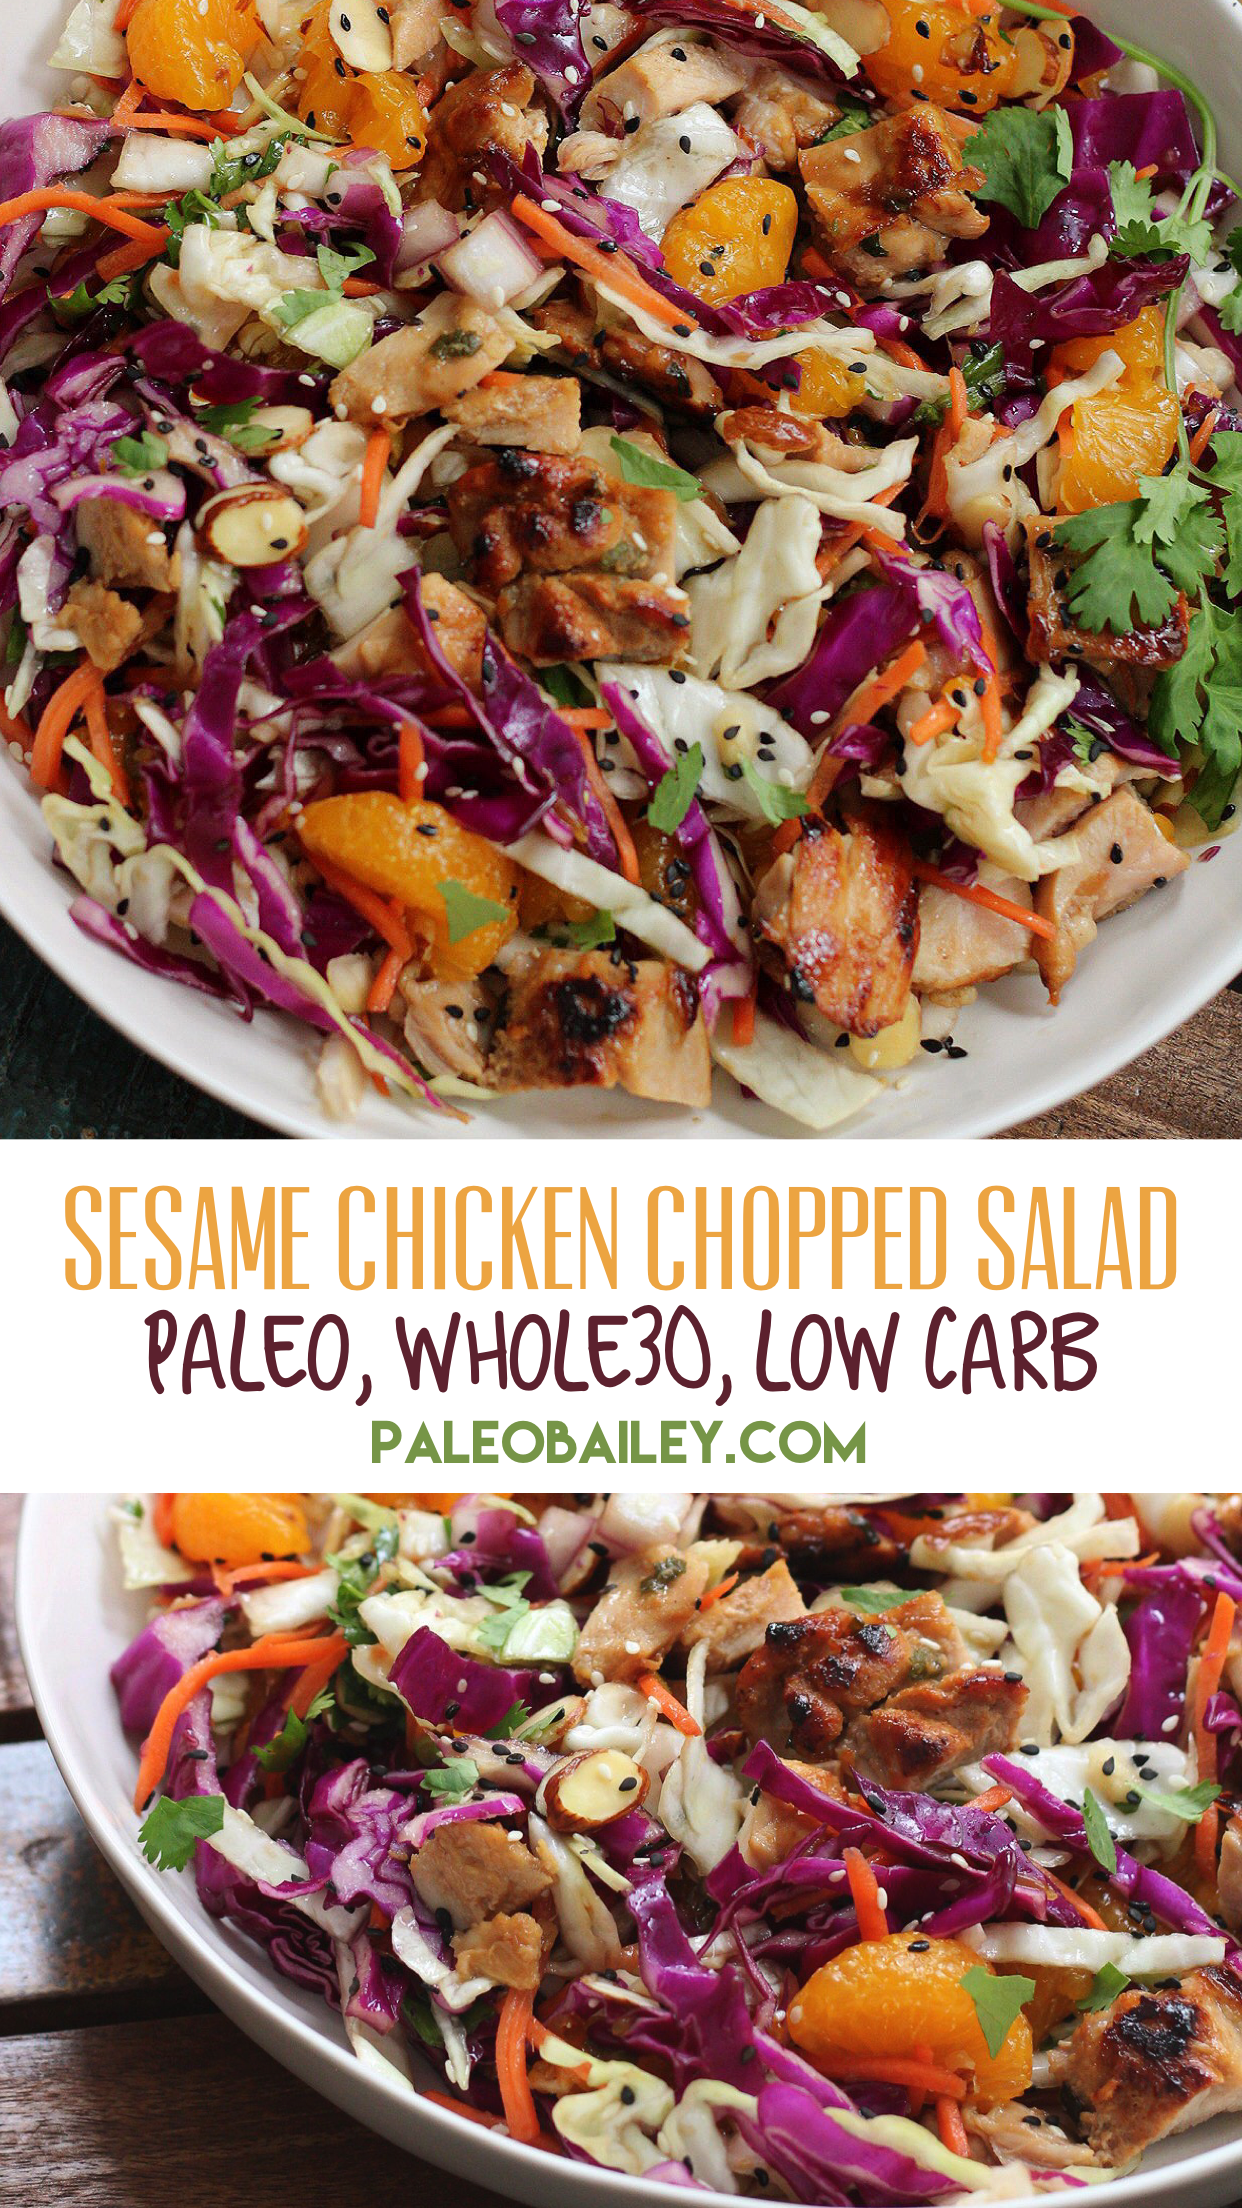 Healthy Sesame Chicken Chopped Salad is an easy paleo salad recipe, and an easy low carb option! The sesame chicken is a great Whole30 meat marinade for grilled chicken, too! It's a family friendly recipe everyone will love #paleosalad #whole30 #whole30salad via @paleobailey